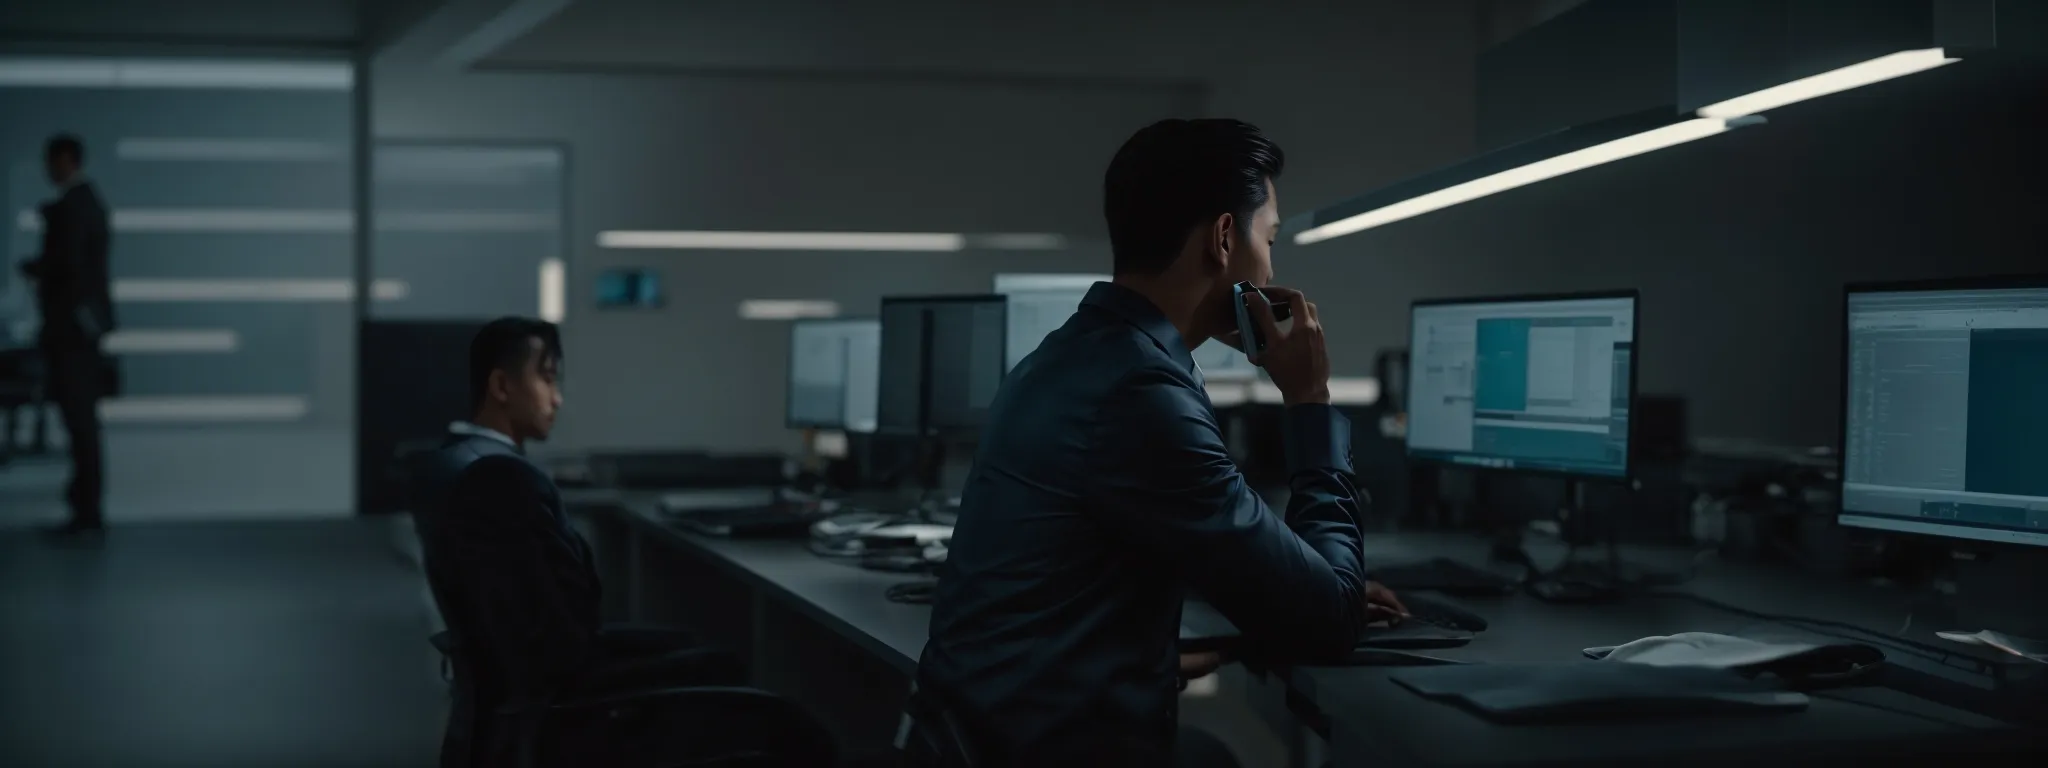 a sleek, modern office with a focused individual typing on a computer where the screen illuminates their face, hinting at advanced technology at work.